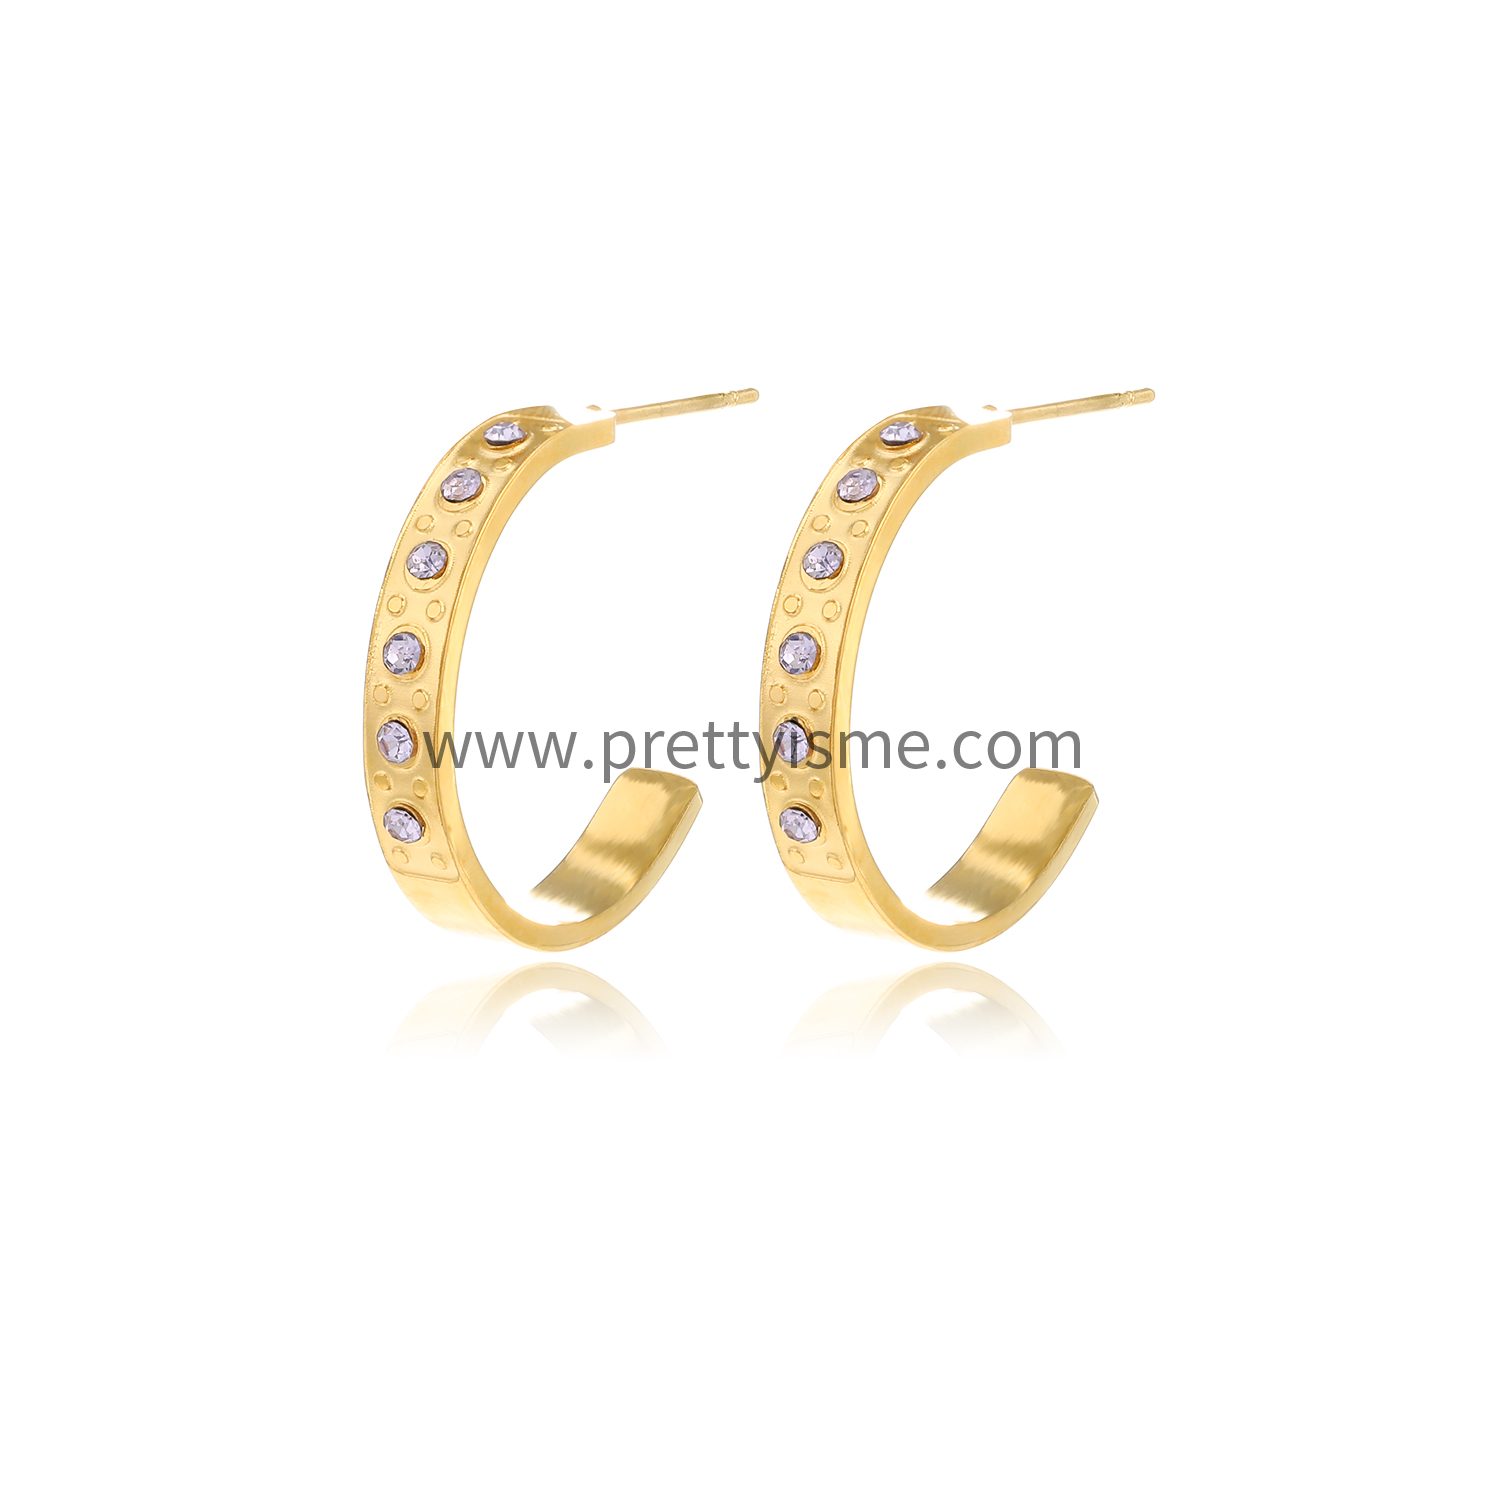 Half Curved Stainless Steel Earrings 18K Gold Plated Water Resistant with Purple Zircon (5).webp